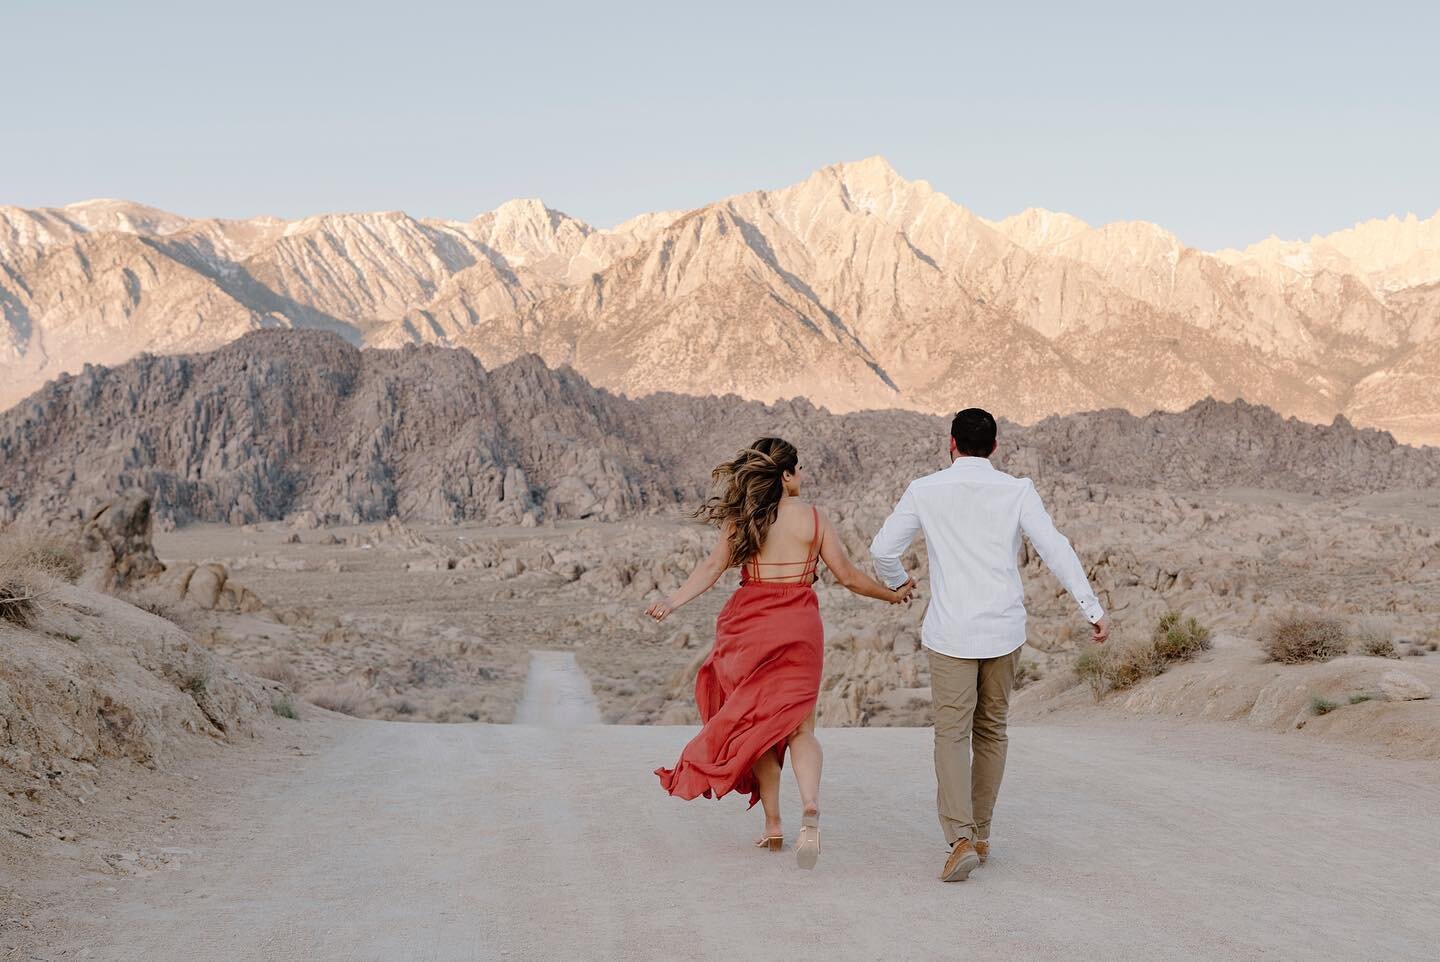 Italia + Evan 🤍
The minute we first got in touch with these two I knew this would be a special engagement session! Italia and Evan were willing to travel from so far away for some of the most epic photos in the Eastern Sierras. We were seriously so 